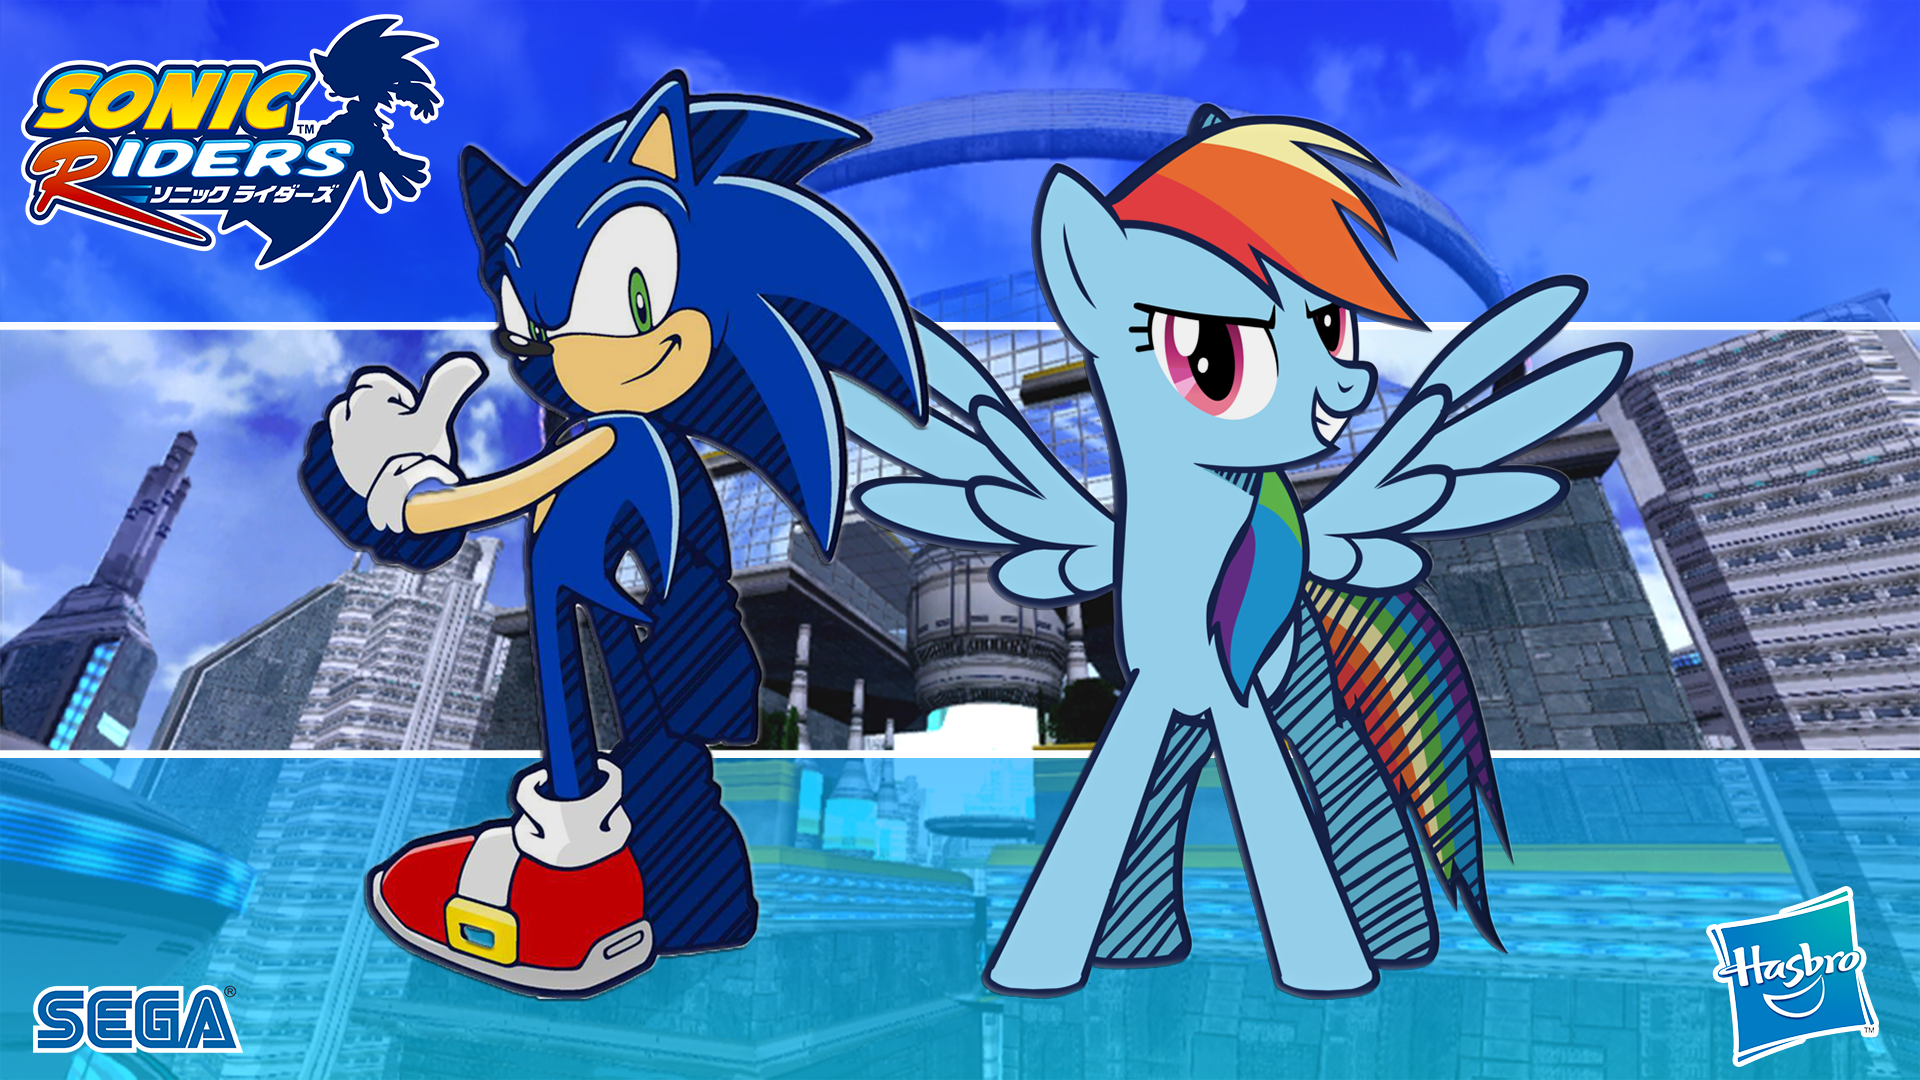 Sketches Sketchup Jet The Hawk Wave The Sparrow Storm Character Sonic Riders  Anthro Video Game Art C Wallpaper  Resolution3000x1688  ID1357583   wallhacom